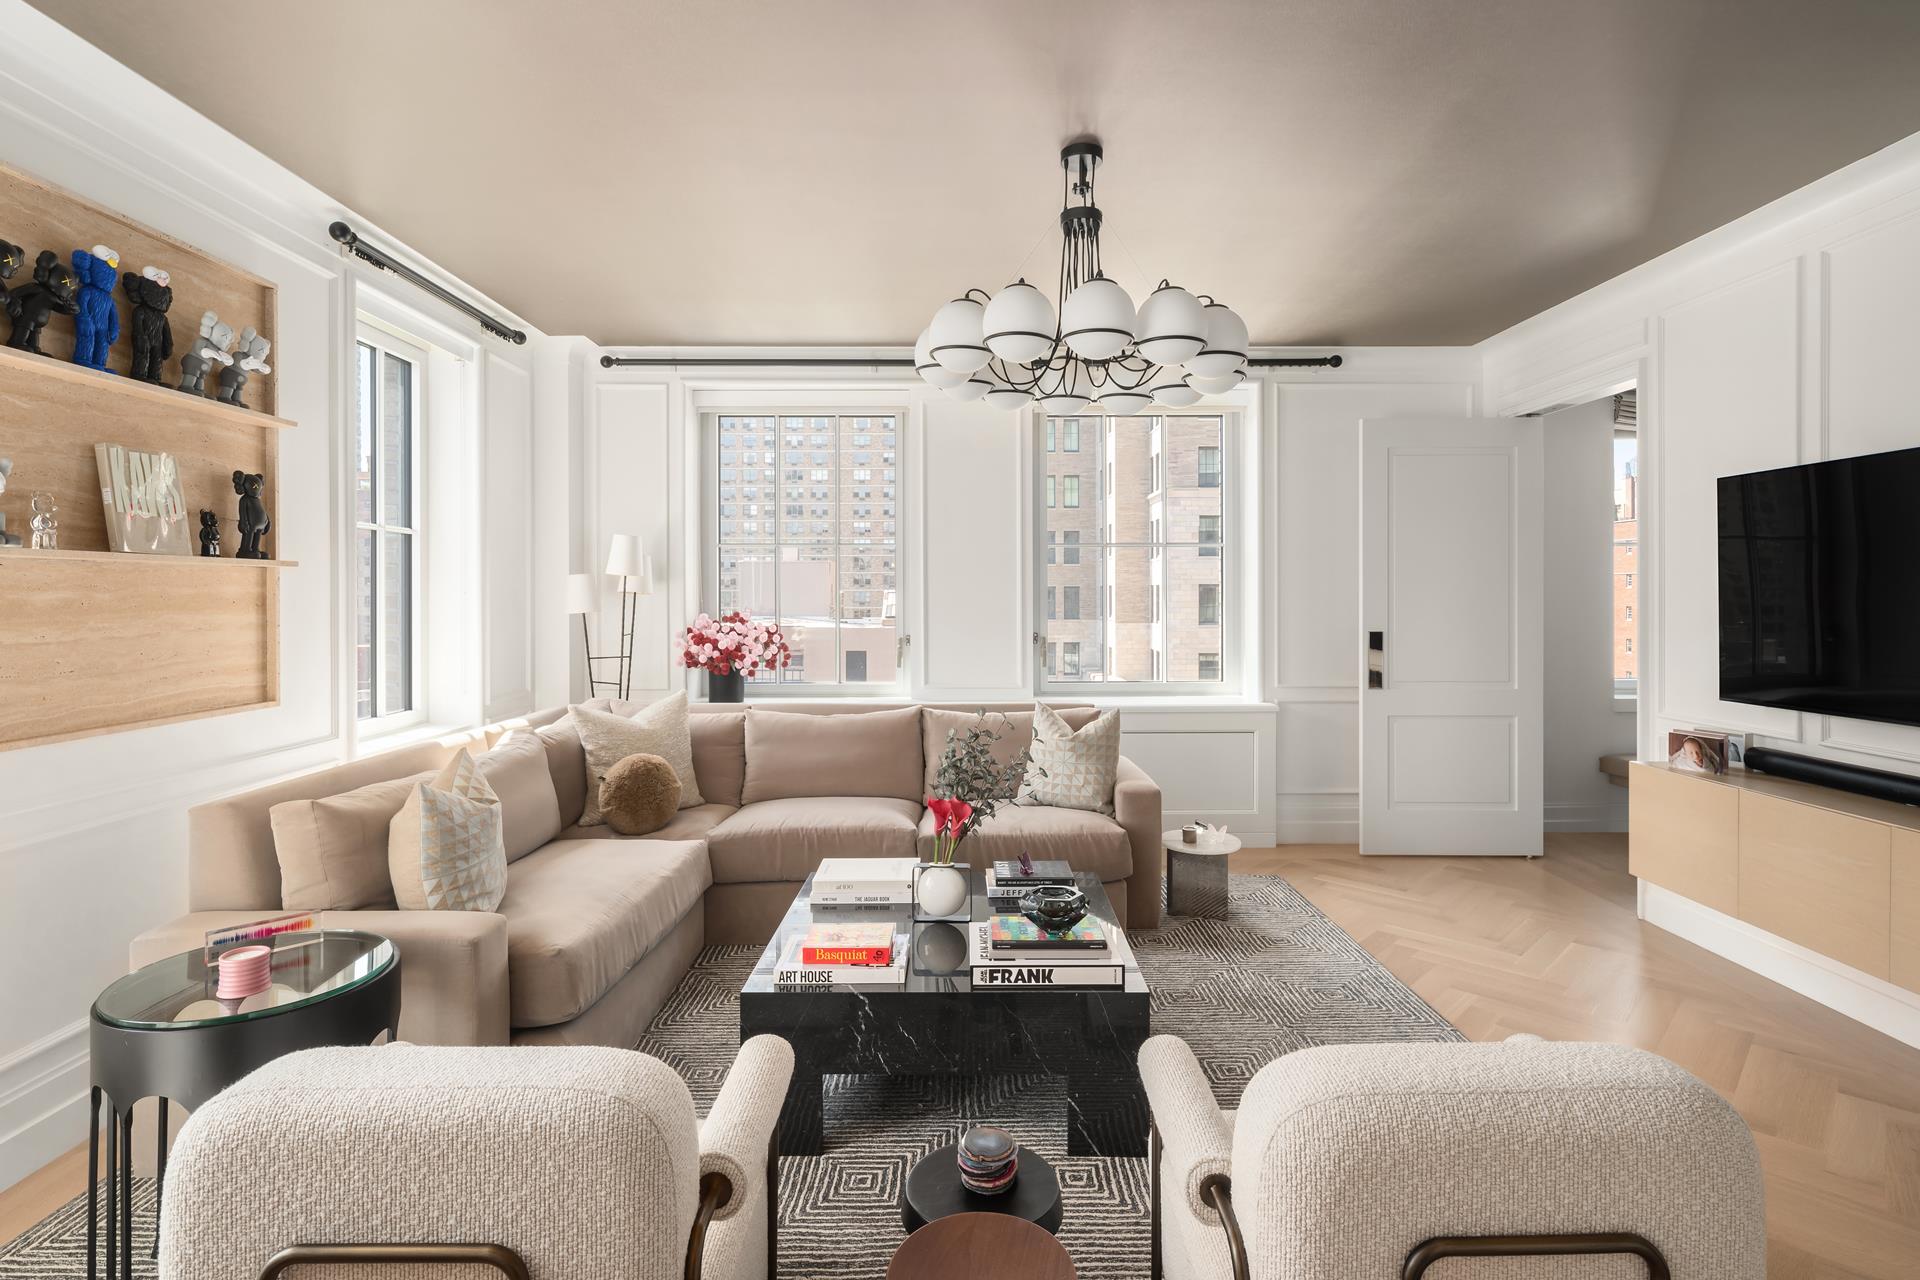 301 East 81st Street 10B, Yorkville, Upper East Side, NYC - 2 Bedrooms  
2.5 Bathrooms  
6 Rooms - 